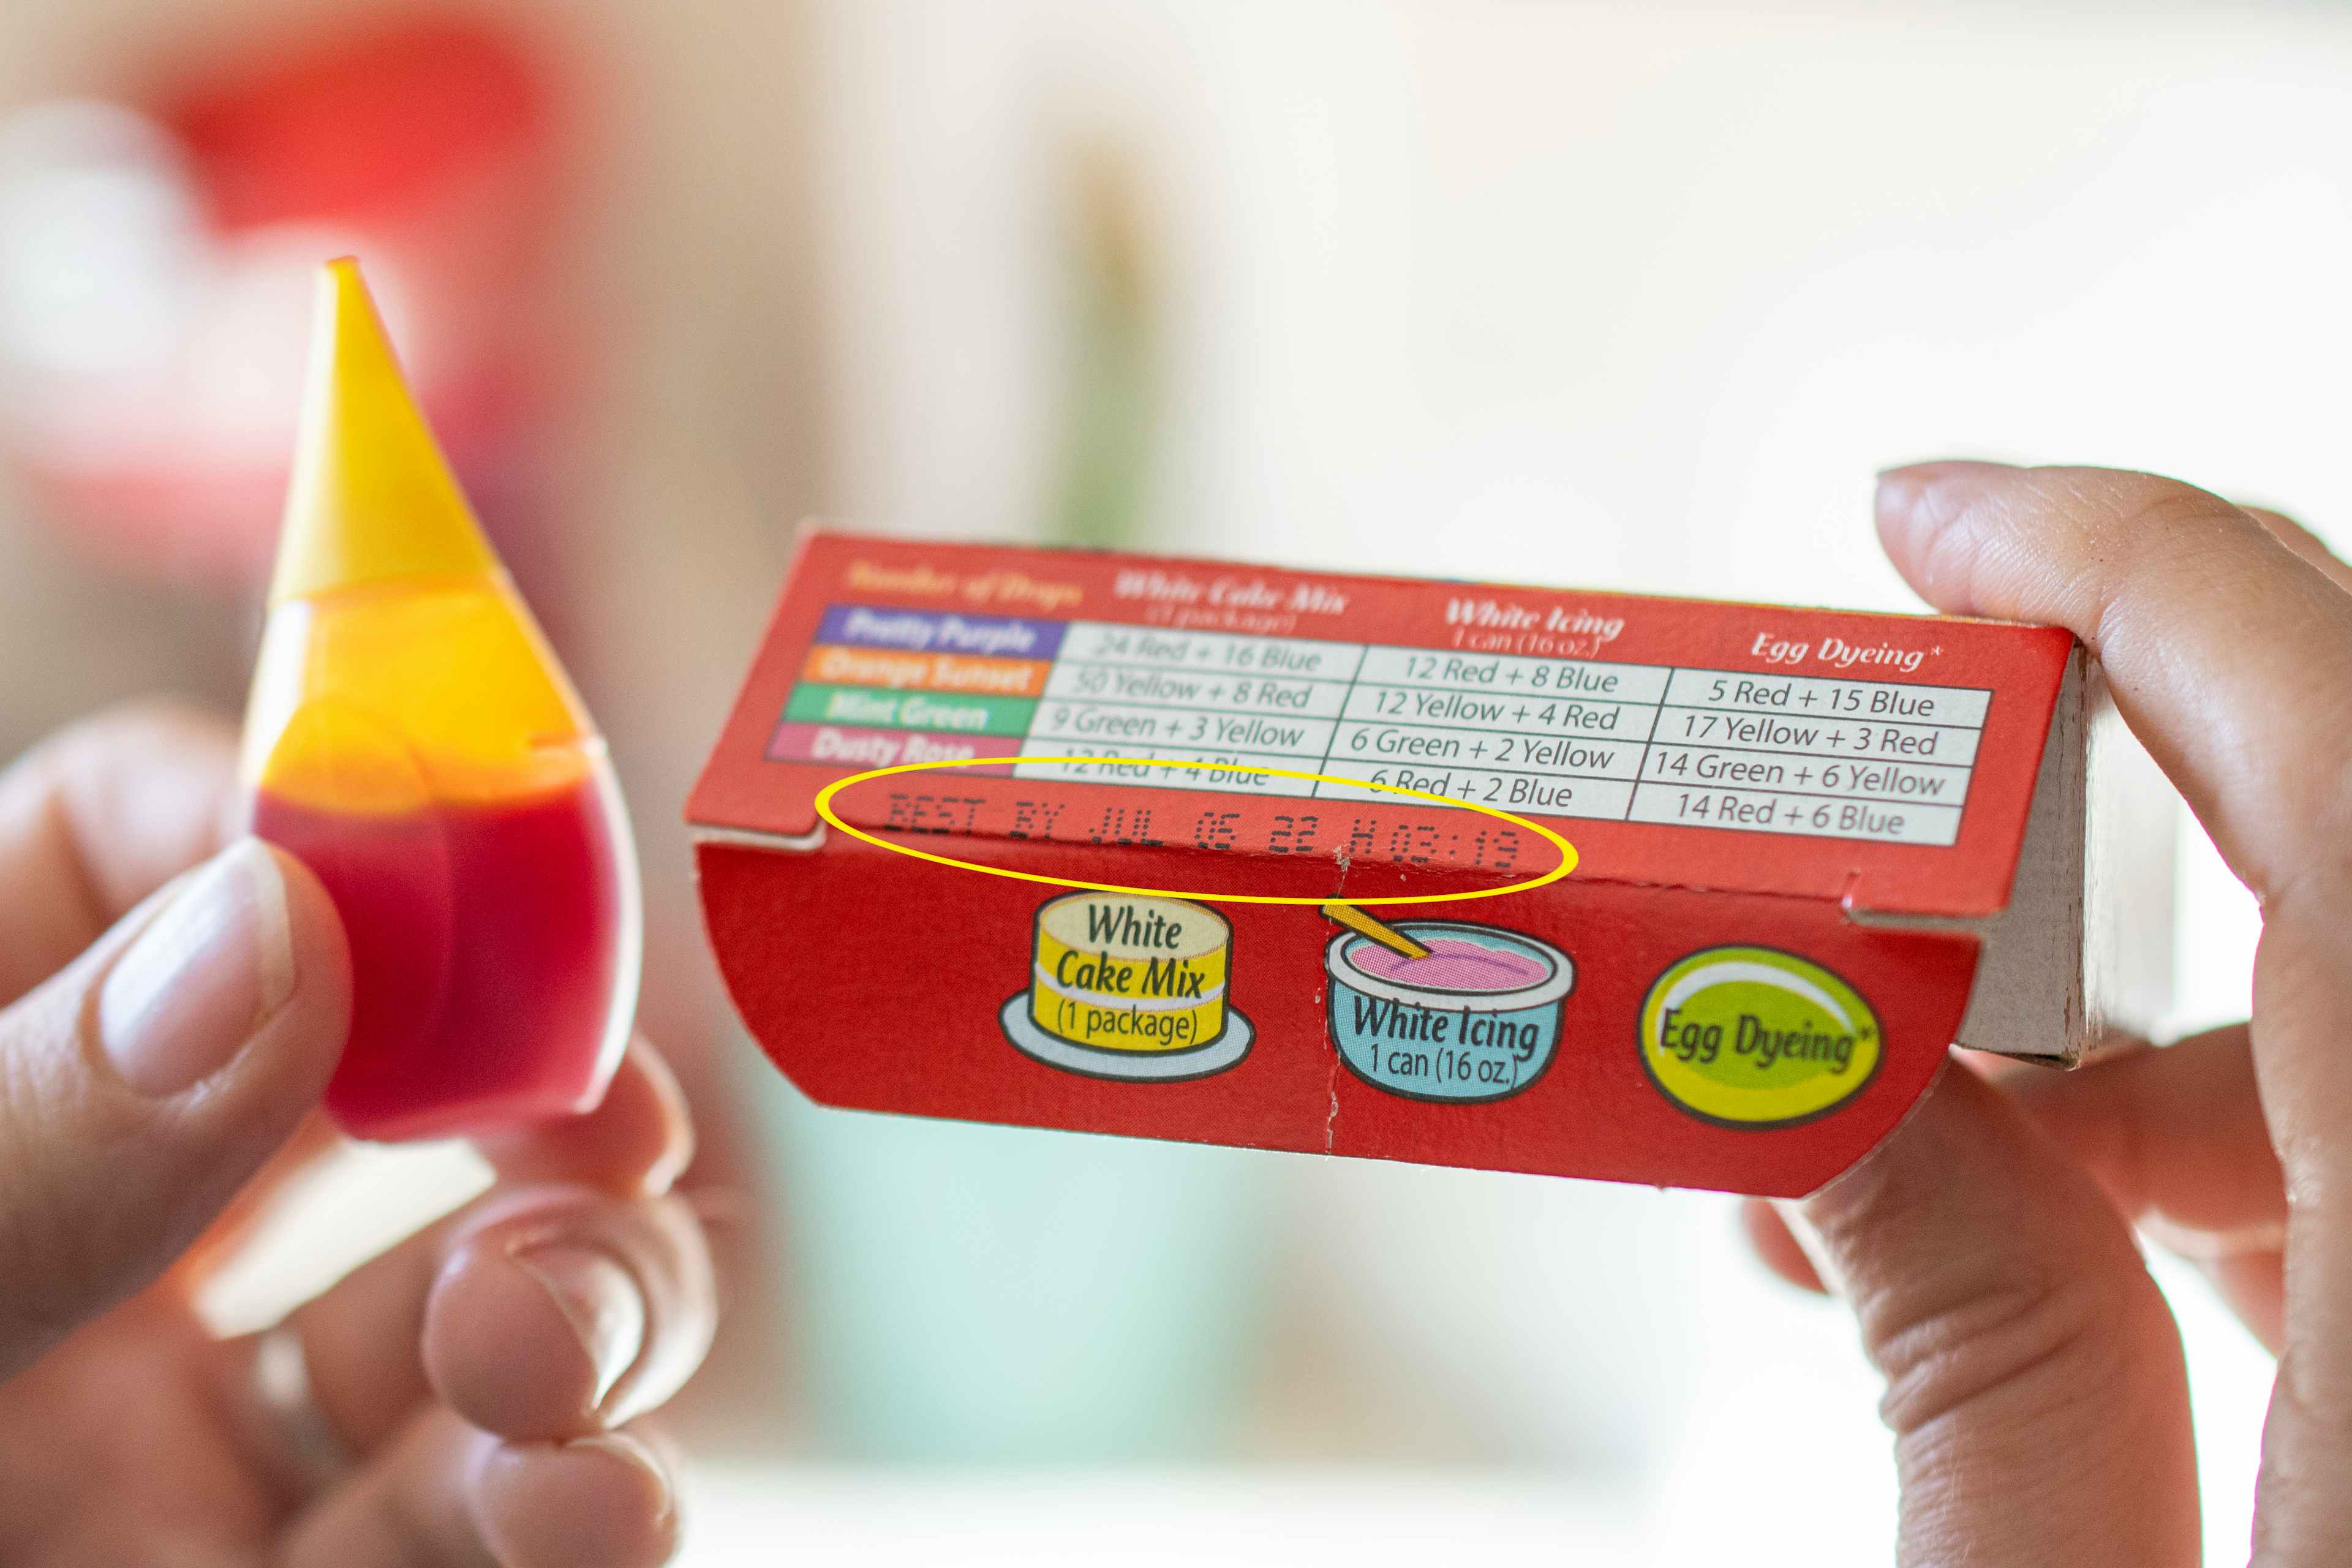 A food coloring box next to a bottle of yellow food coloring. A yellow circle is around the expiration date.